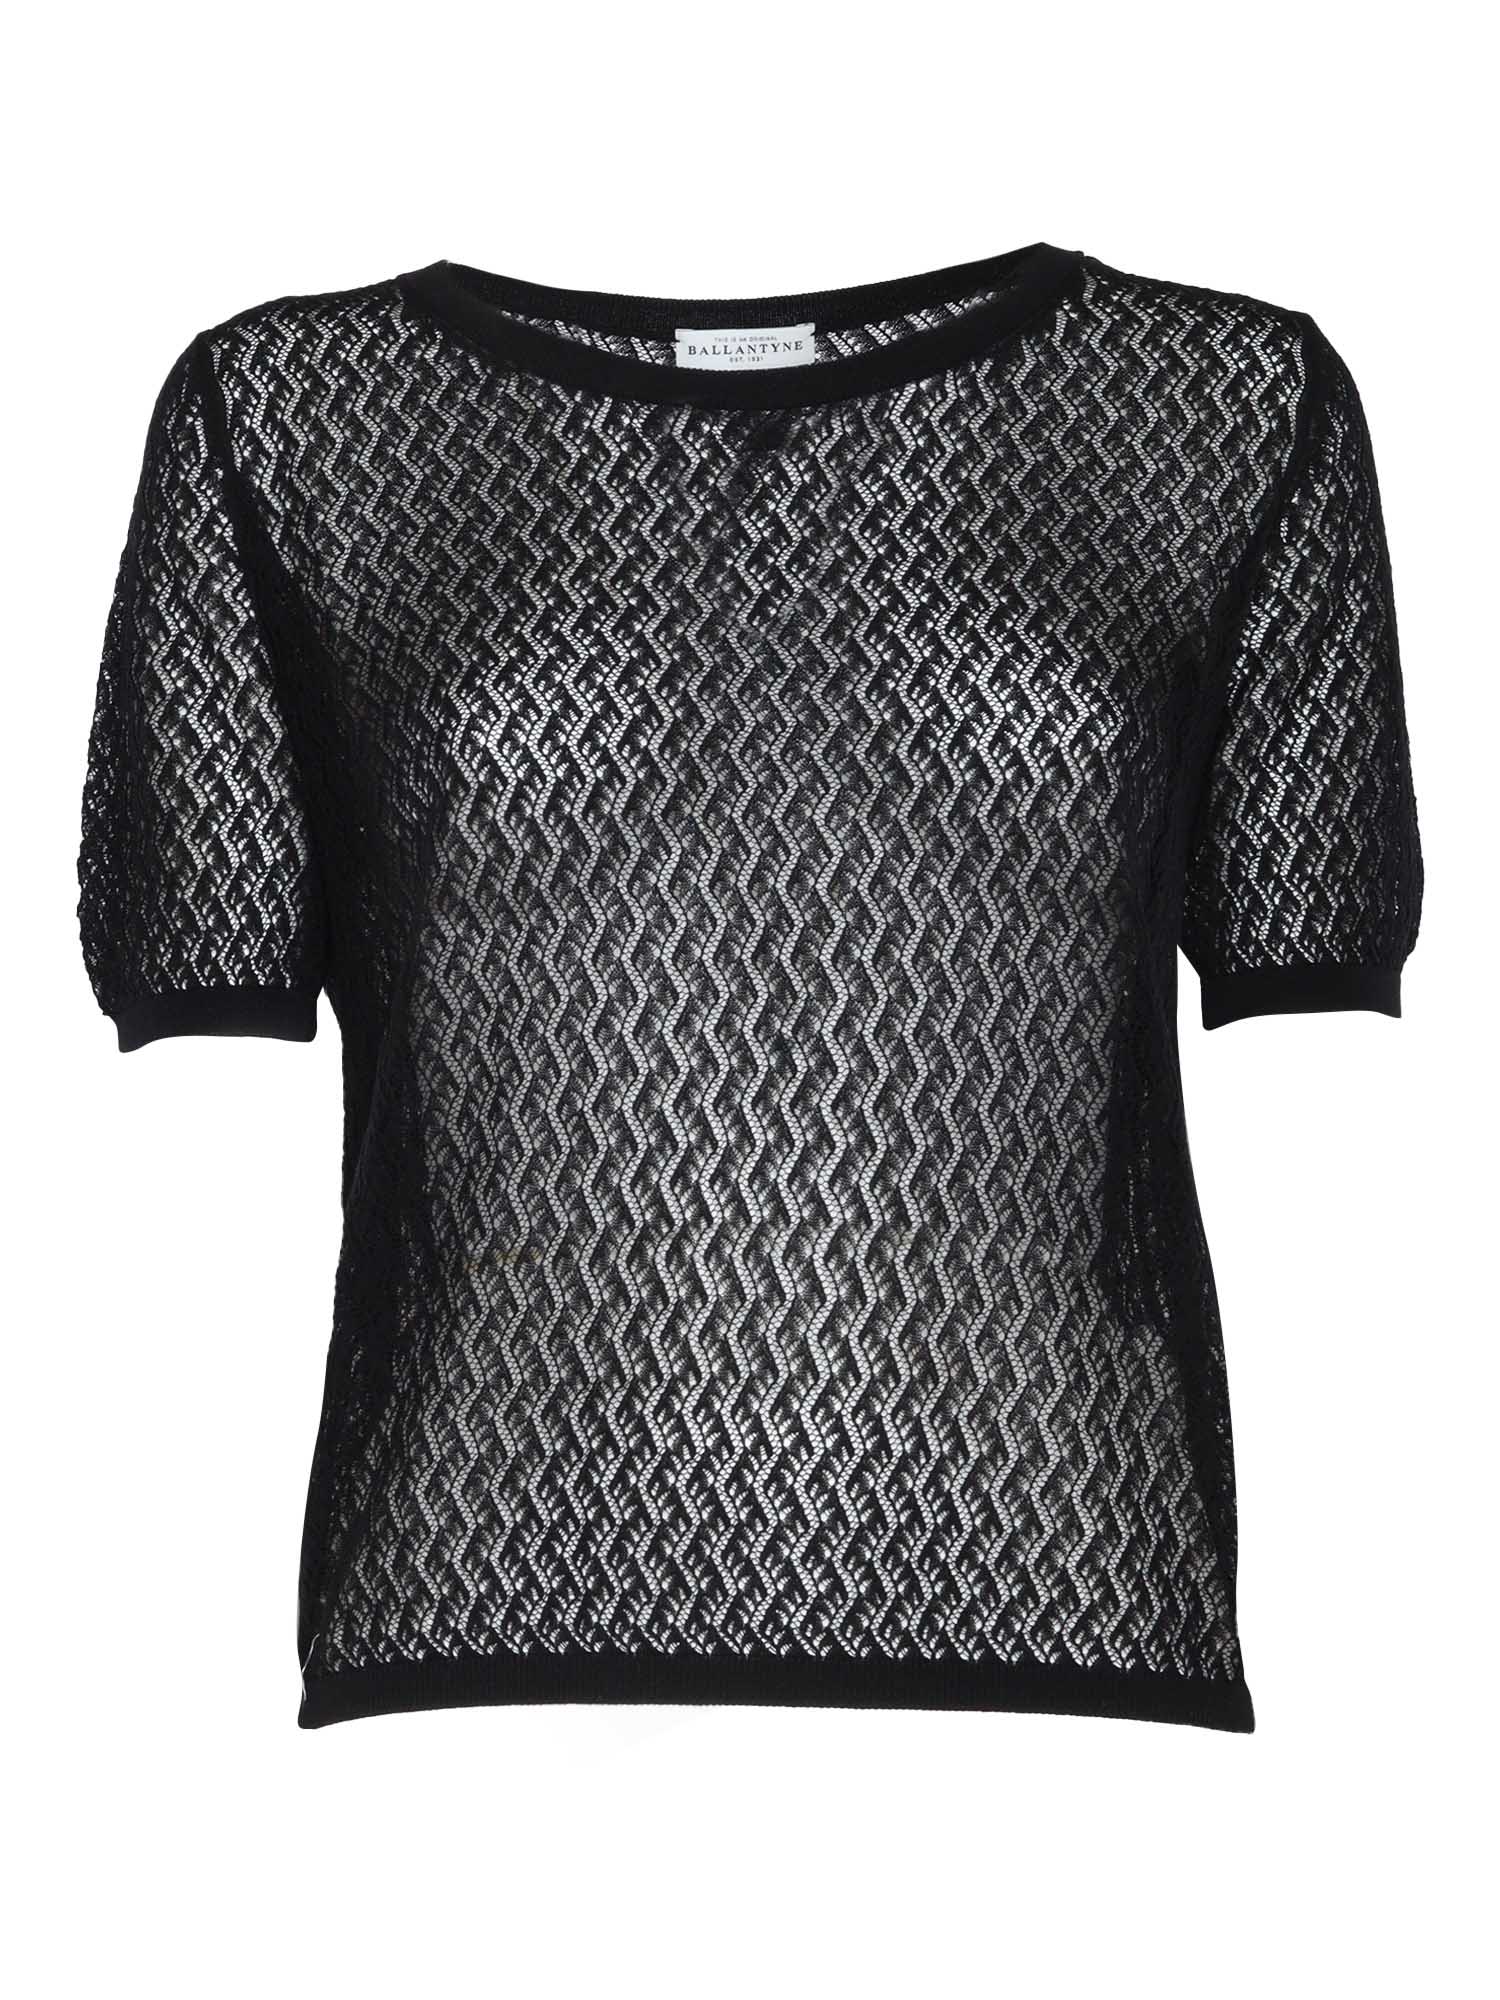 Black Perforated Sweater